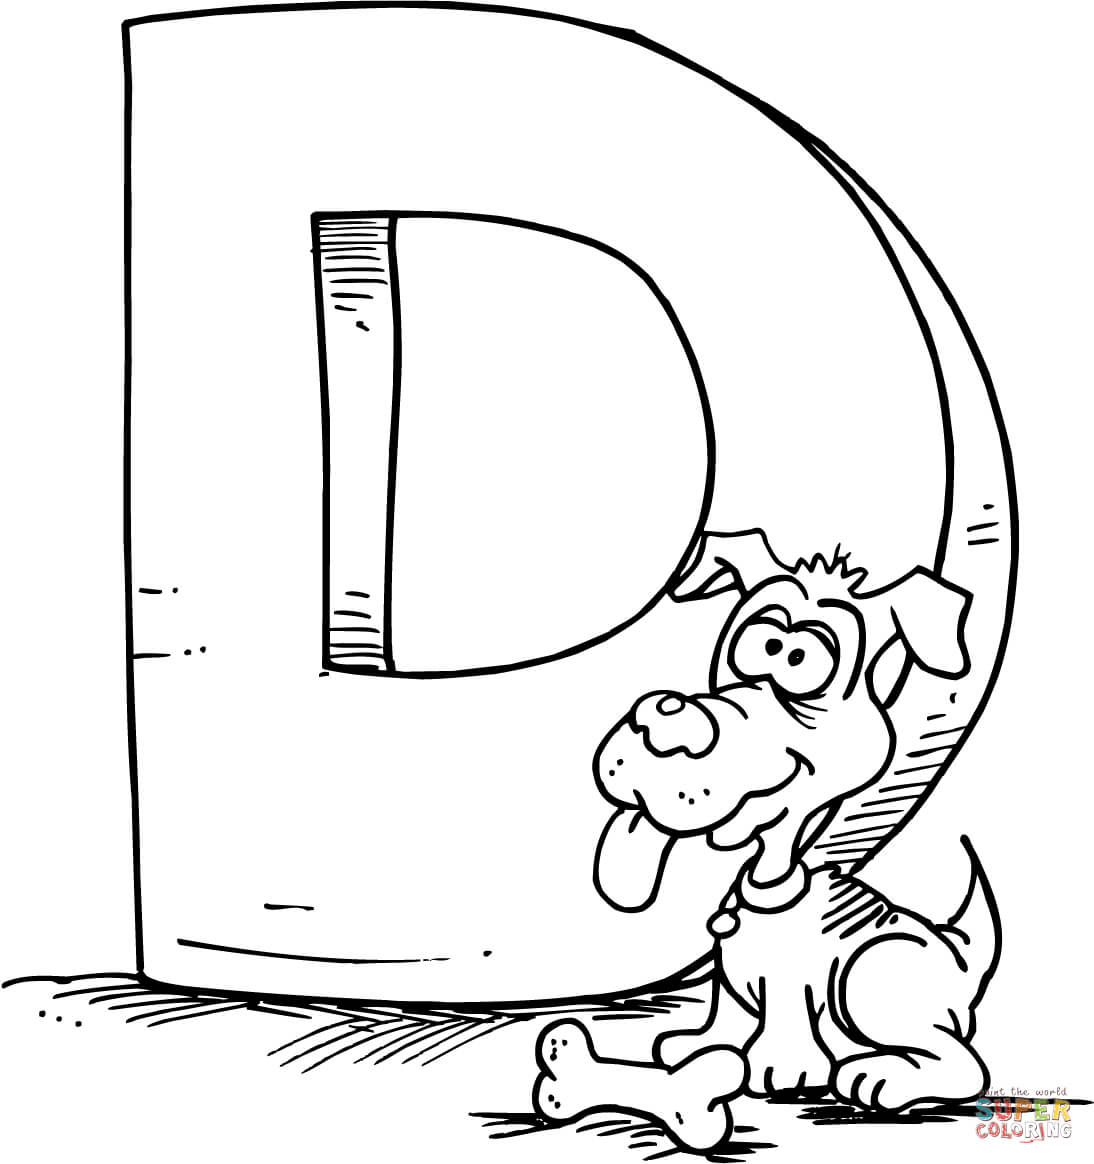 Letter D coloring pages | Free Coloring Pages